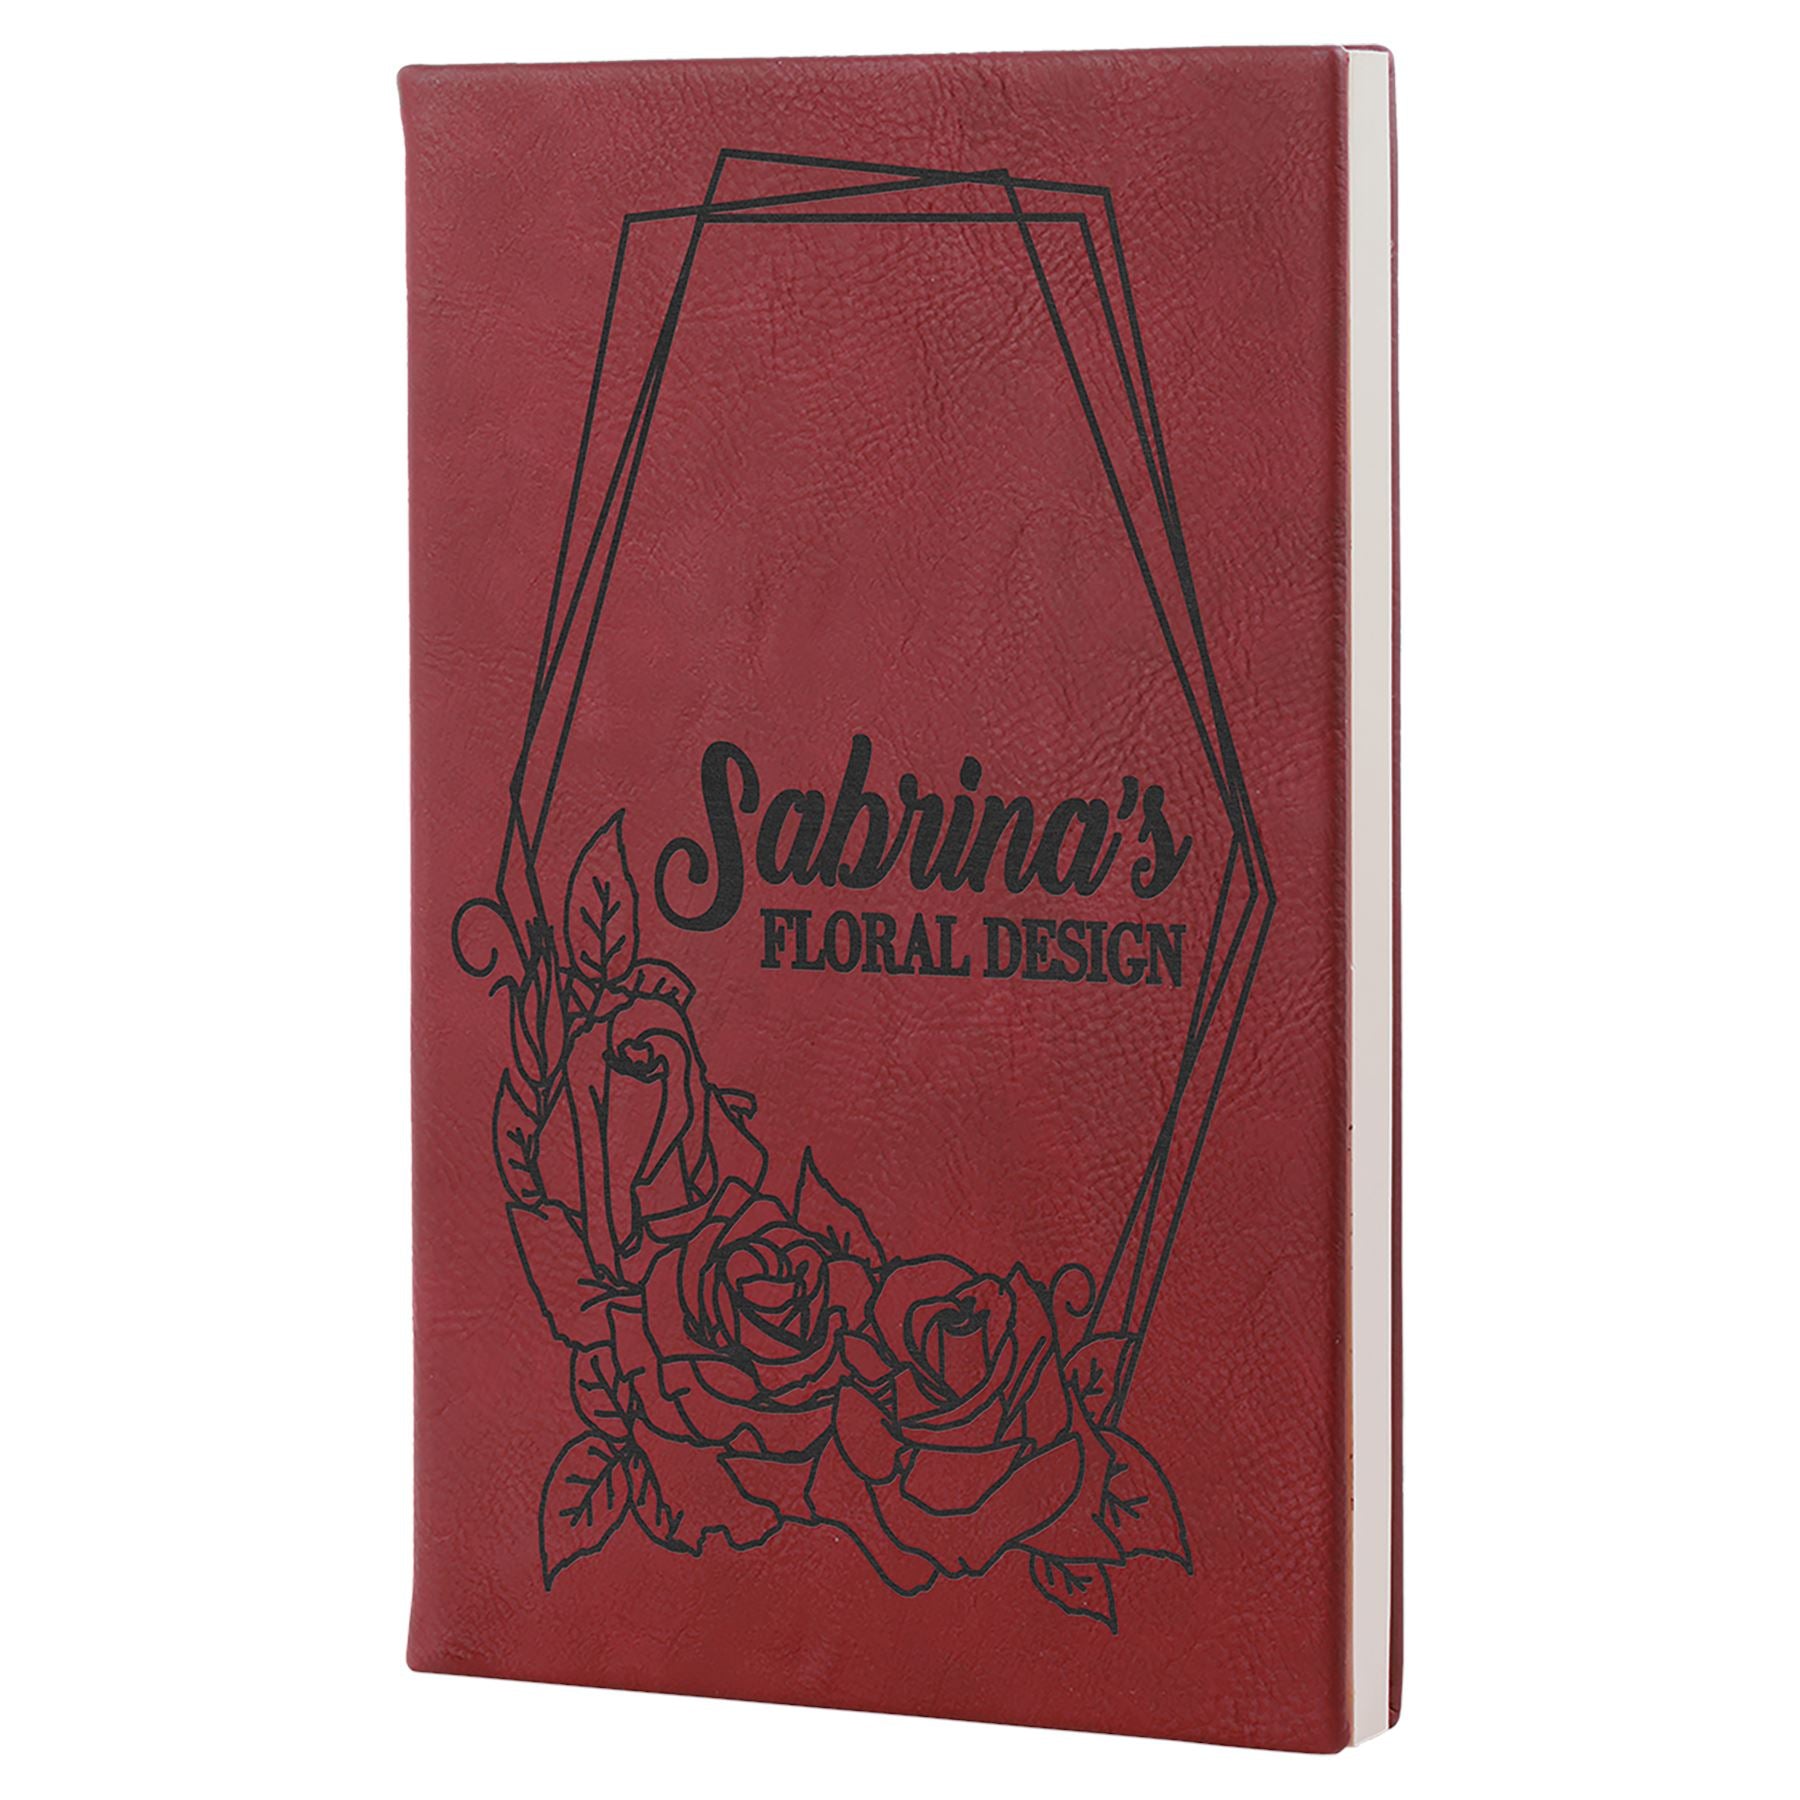 Sketch Book-Unlined Paper, 5 1/4" x 8 1/4" Laserable Leatherette, Laser Engraved Journal Craftworks NW 